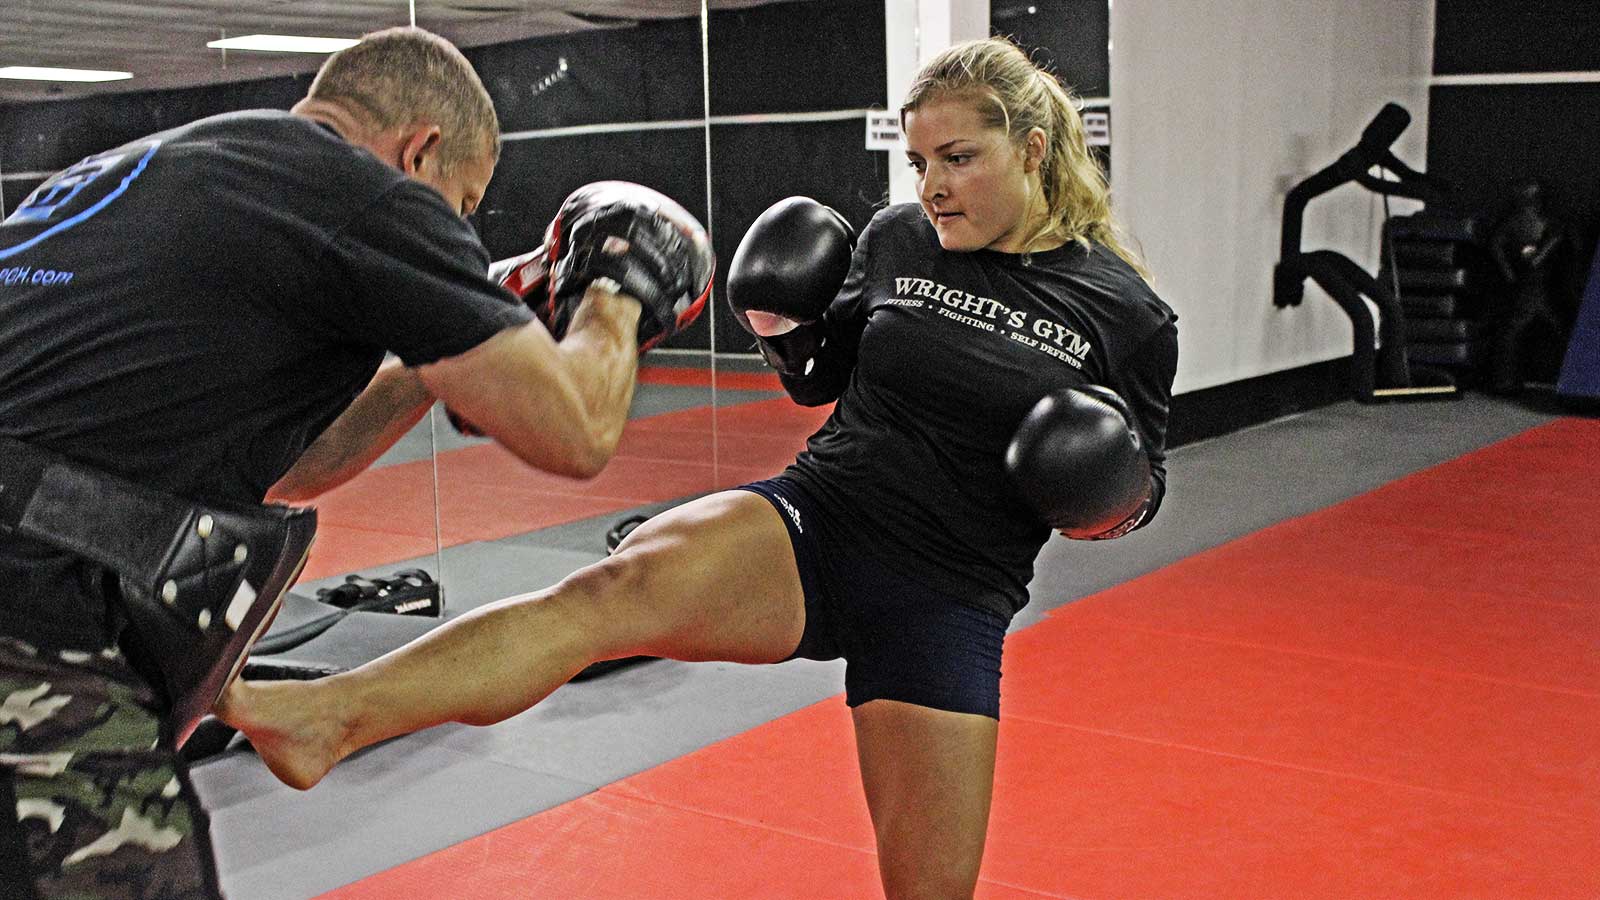 Wright's Gym: Pittsburgh's Only Certified Krav Maga<sup>&trade